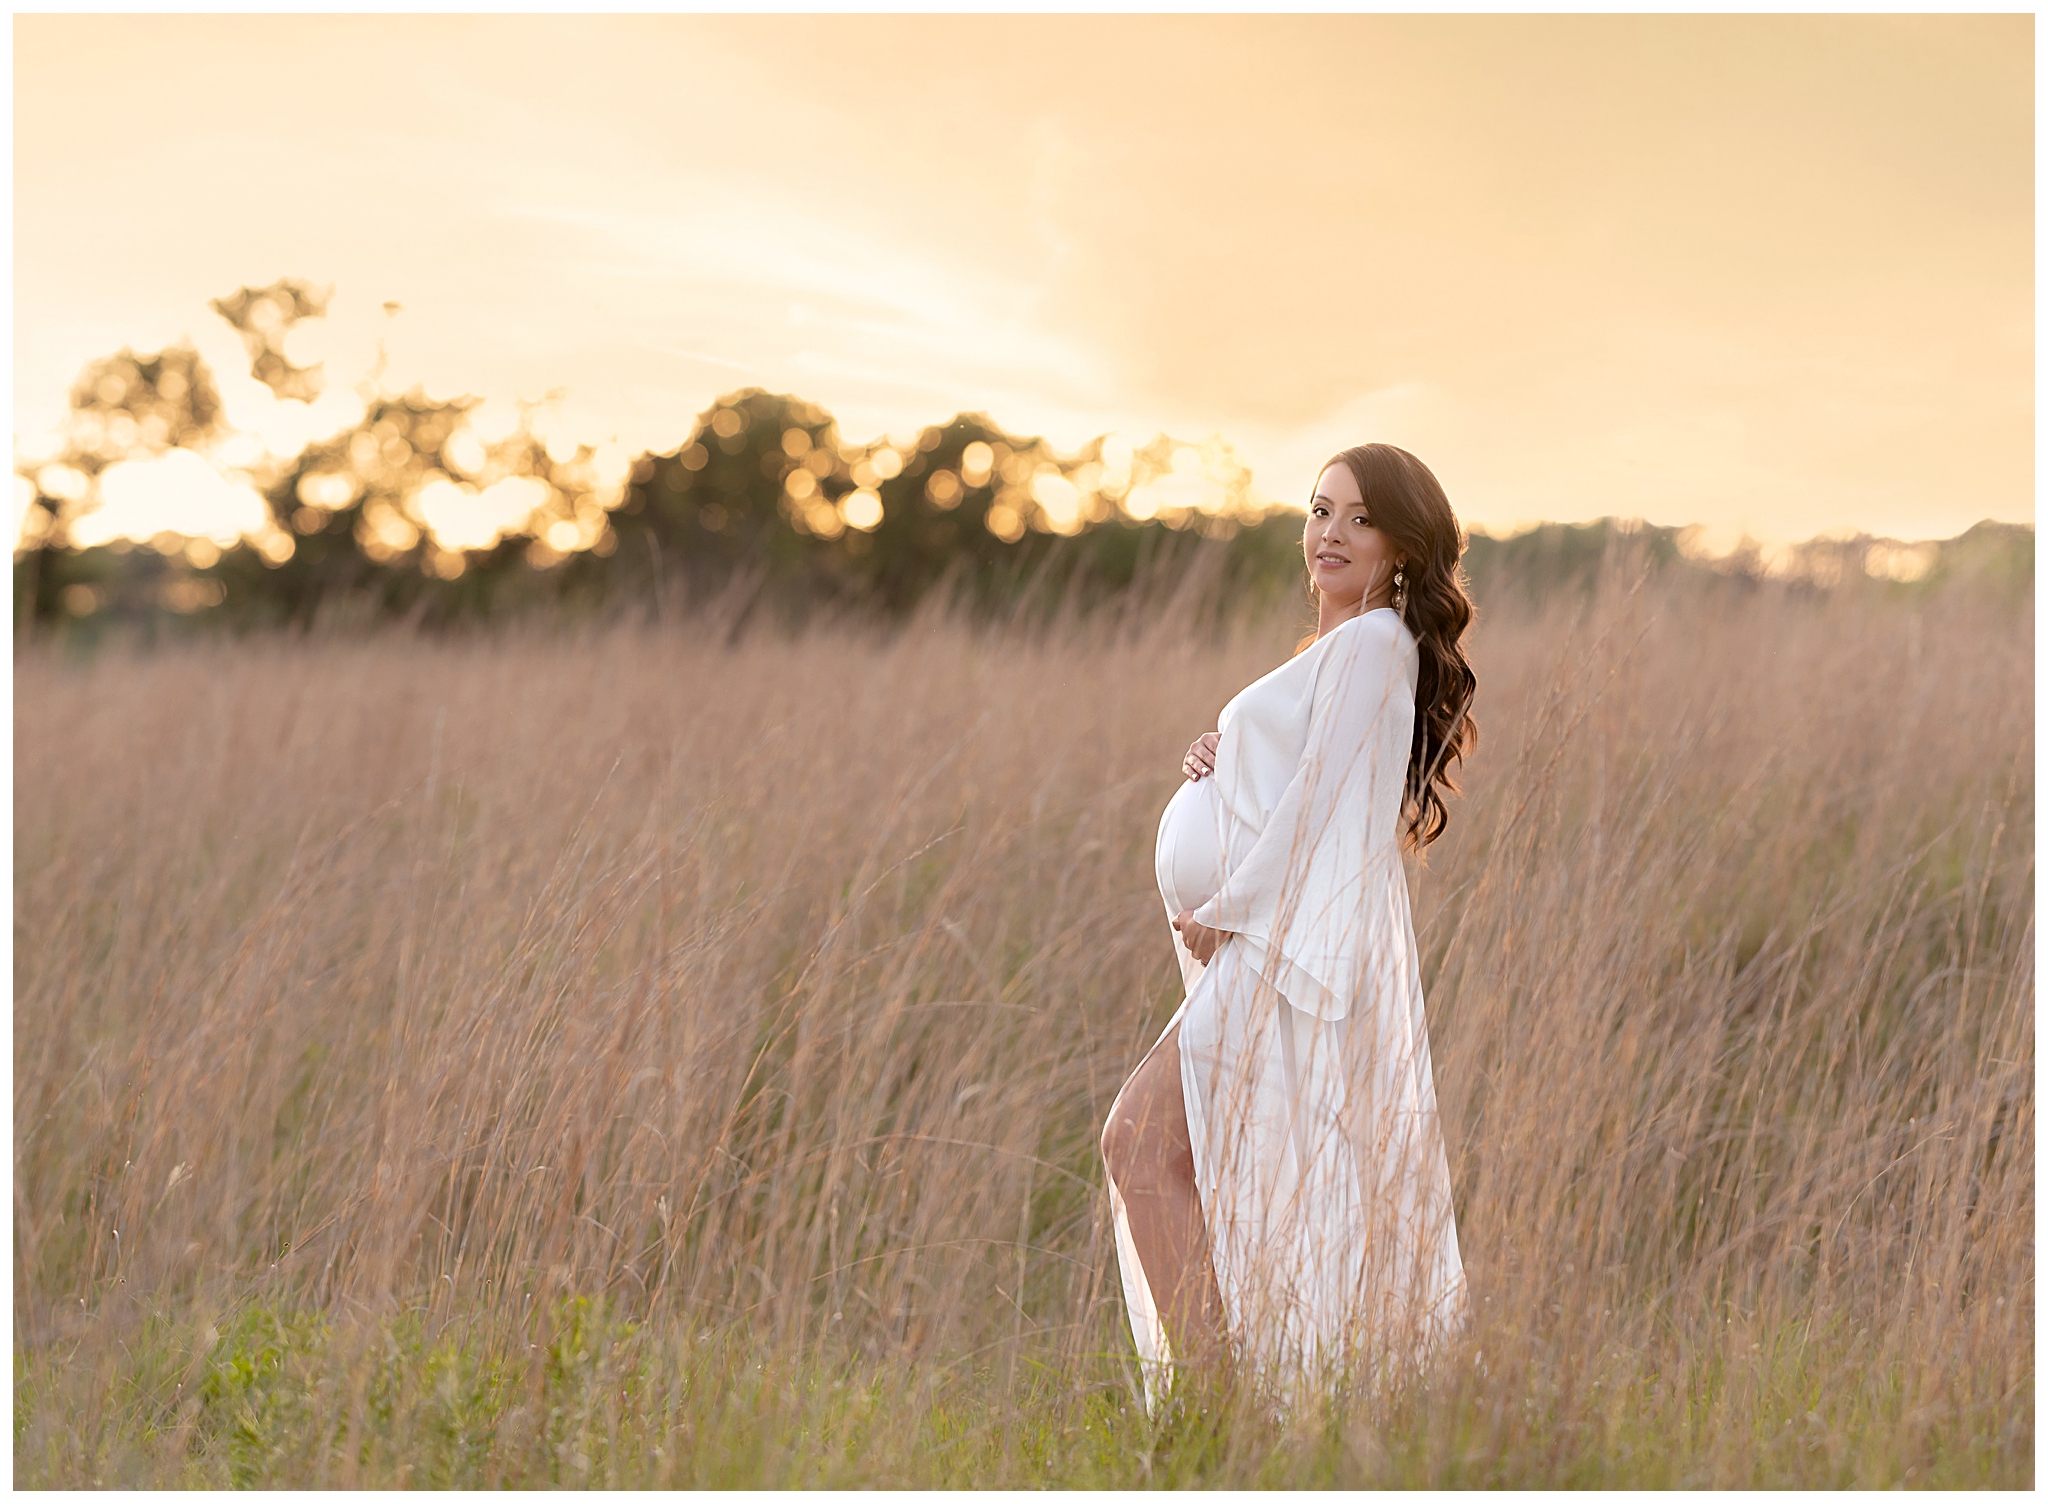 Pregnant woman in a white maternity gown stands in a field of long grass in front of a sunset